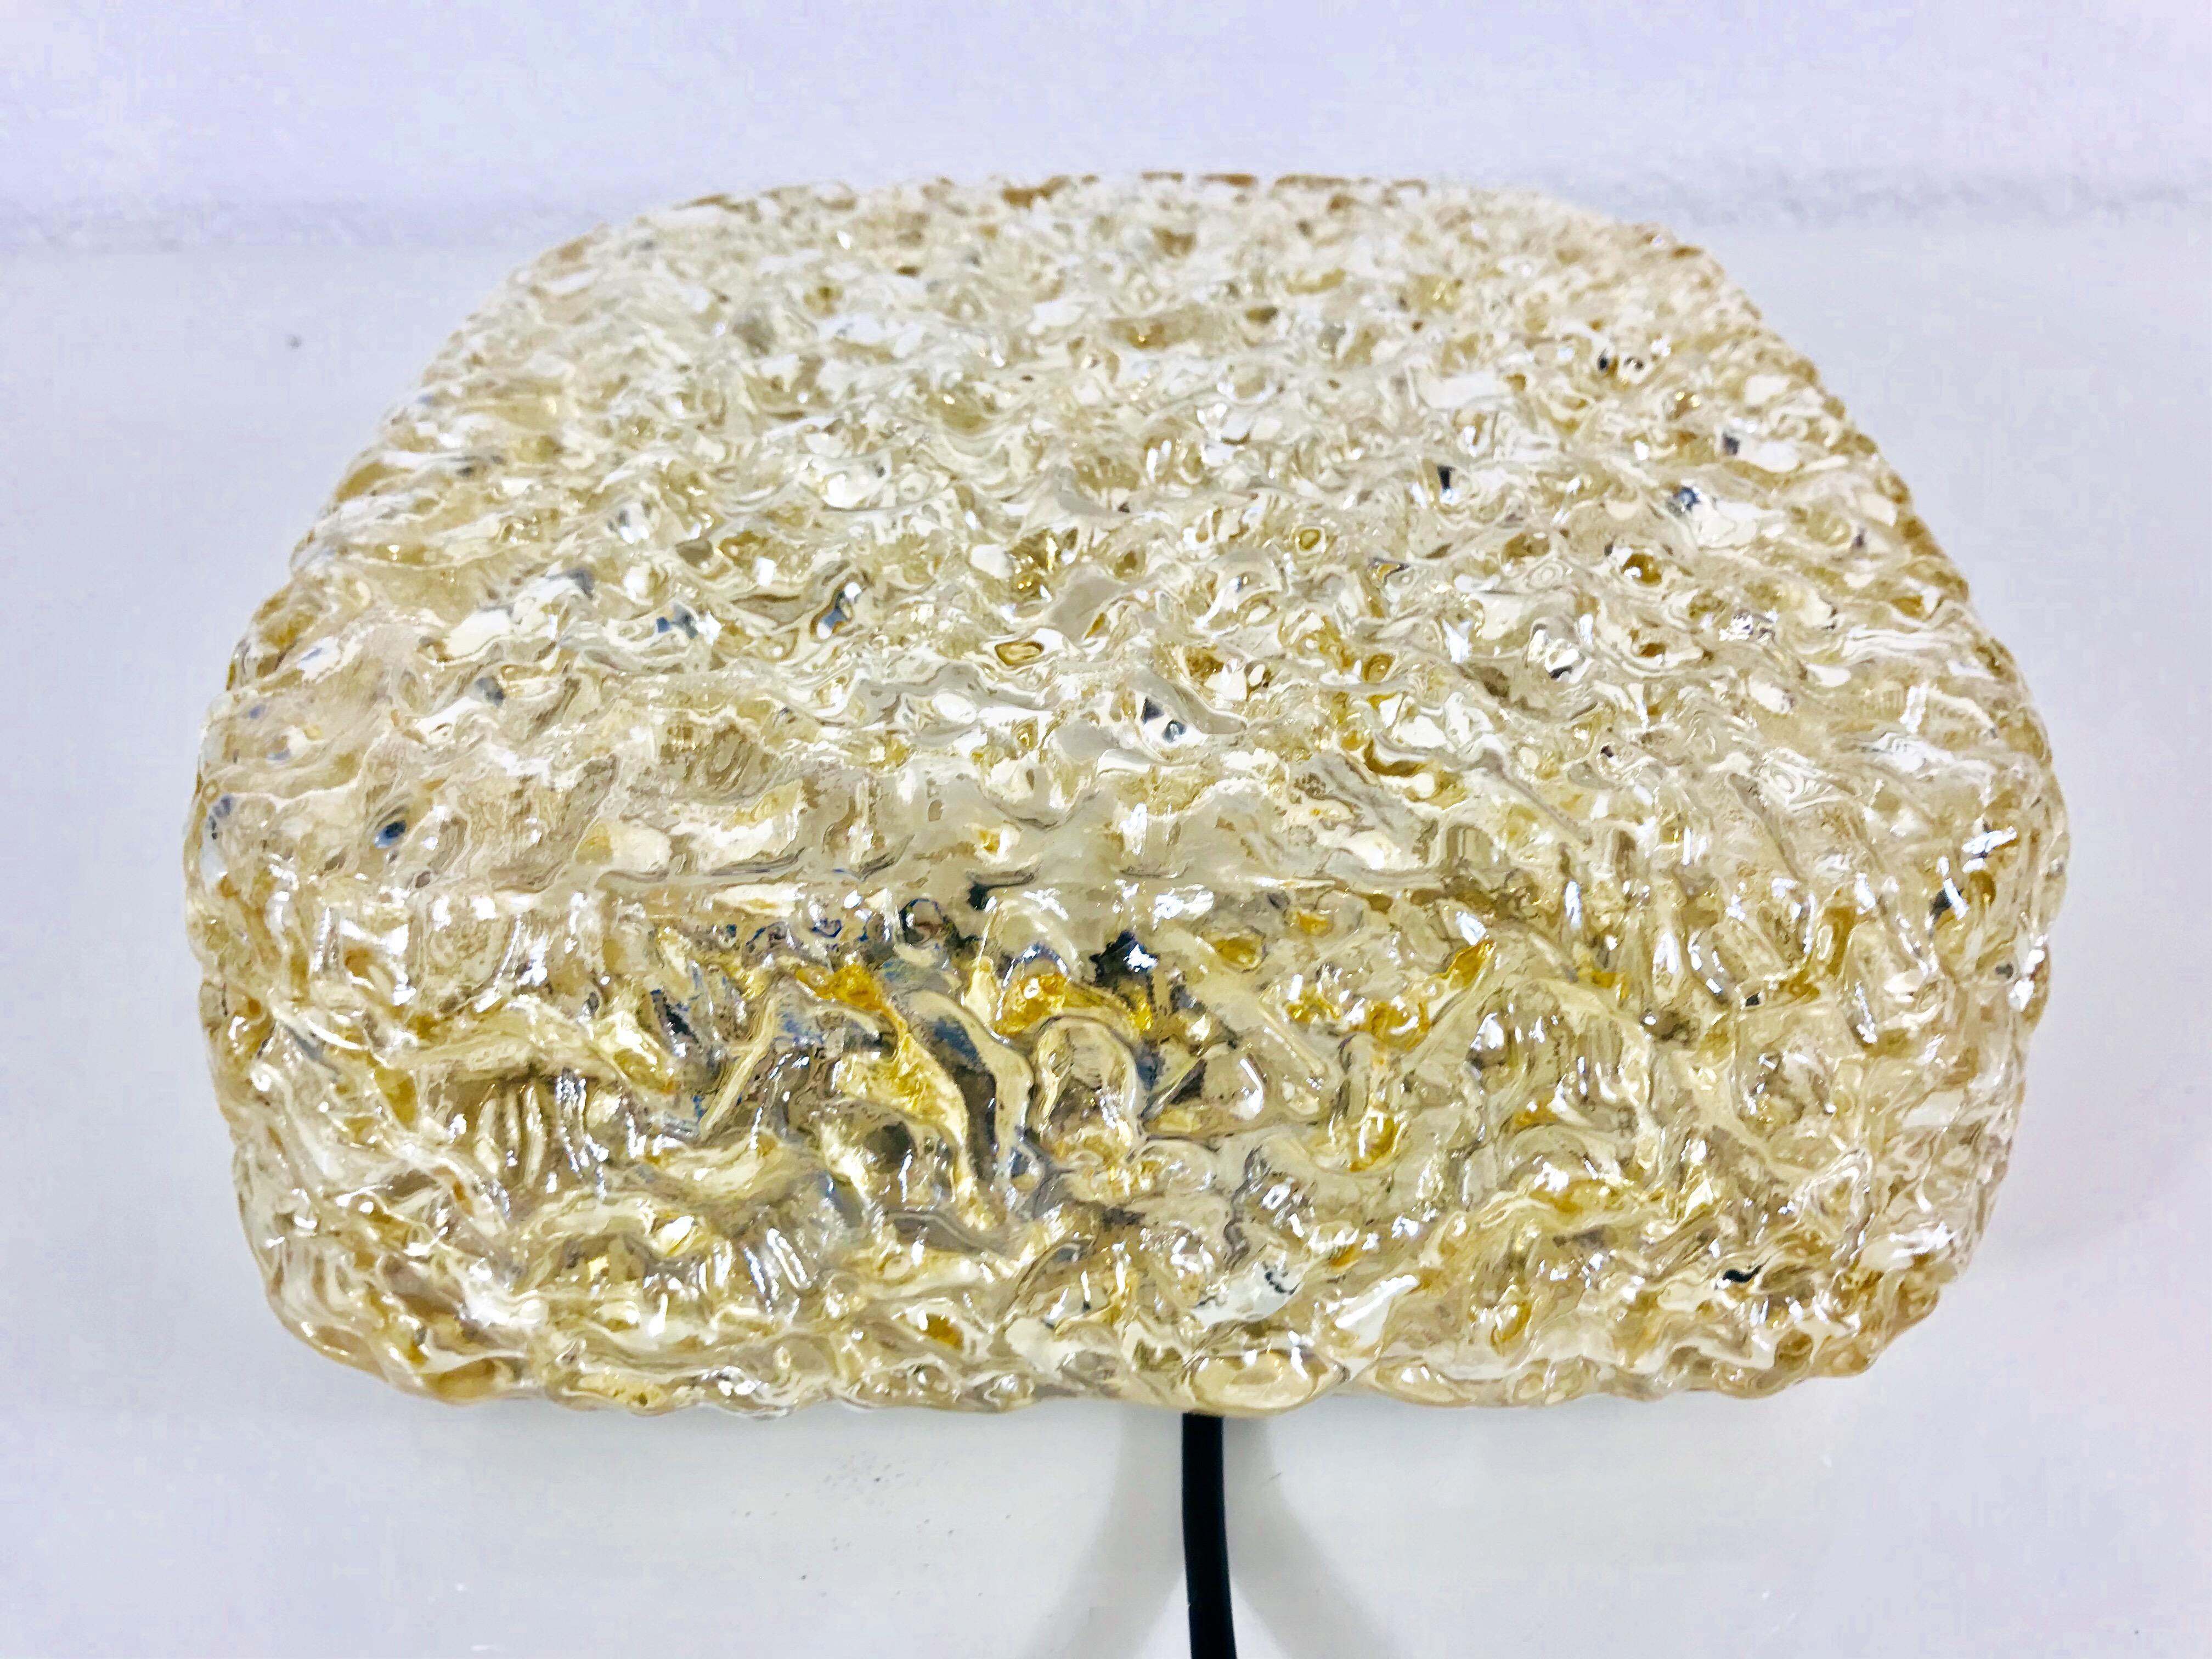 A Mid-Century Modern flush mount by the German brand Glashütte Limburg. It has a square shape and is made of crystal glass and brass. The glass shade is structured.

The light requires one E27 light bulb.